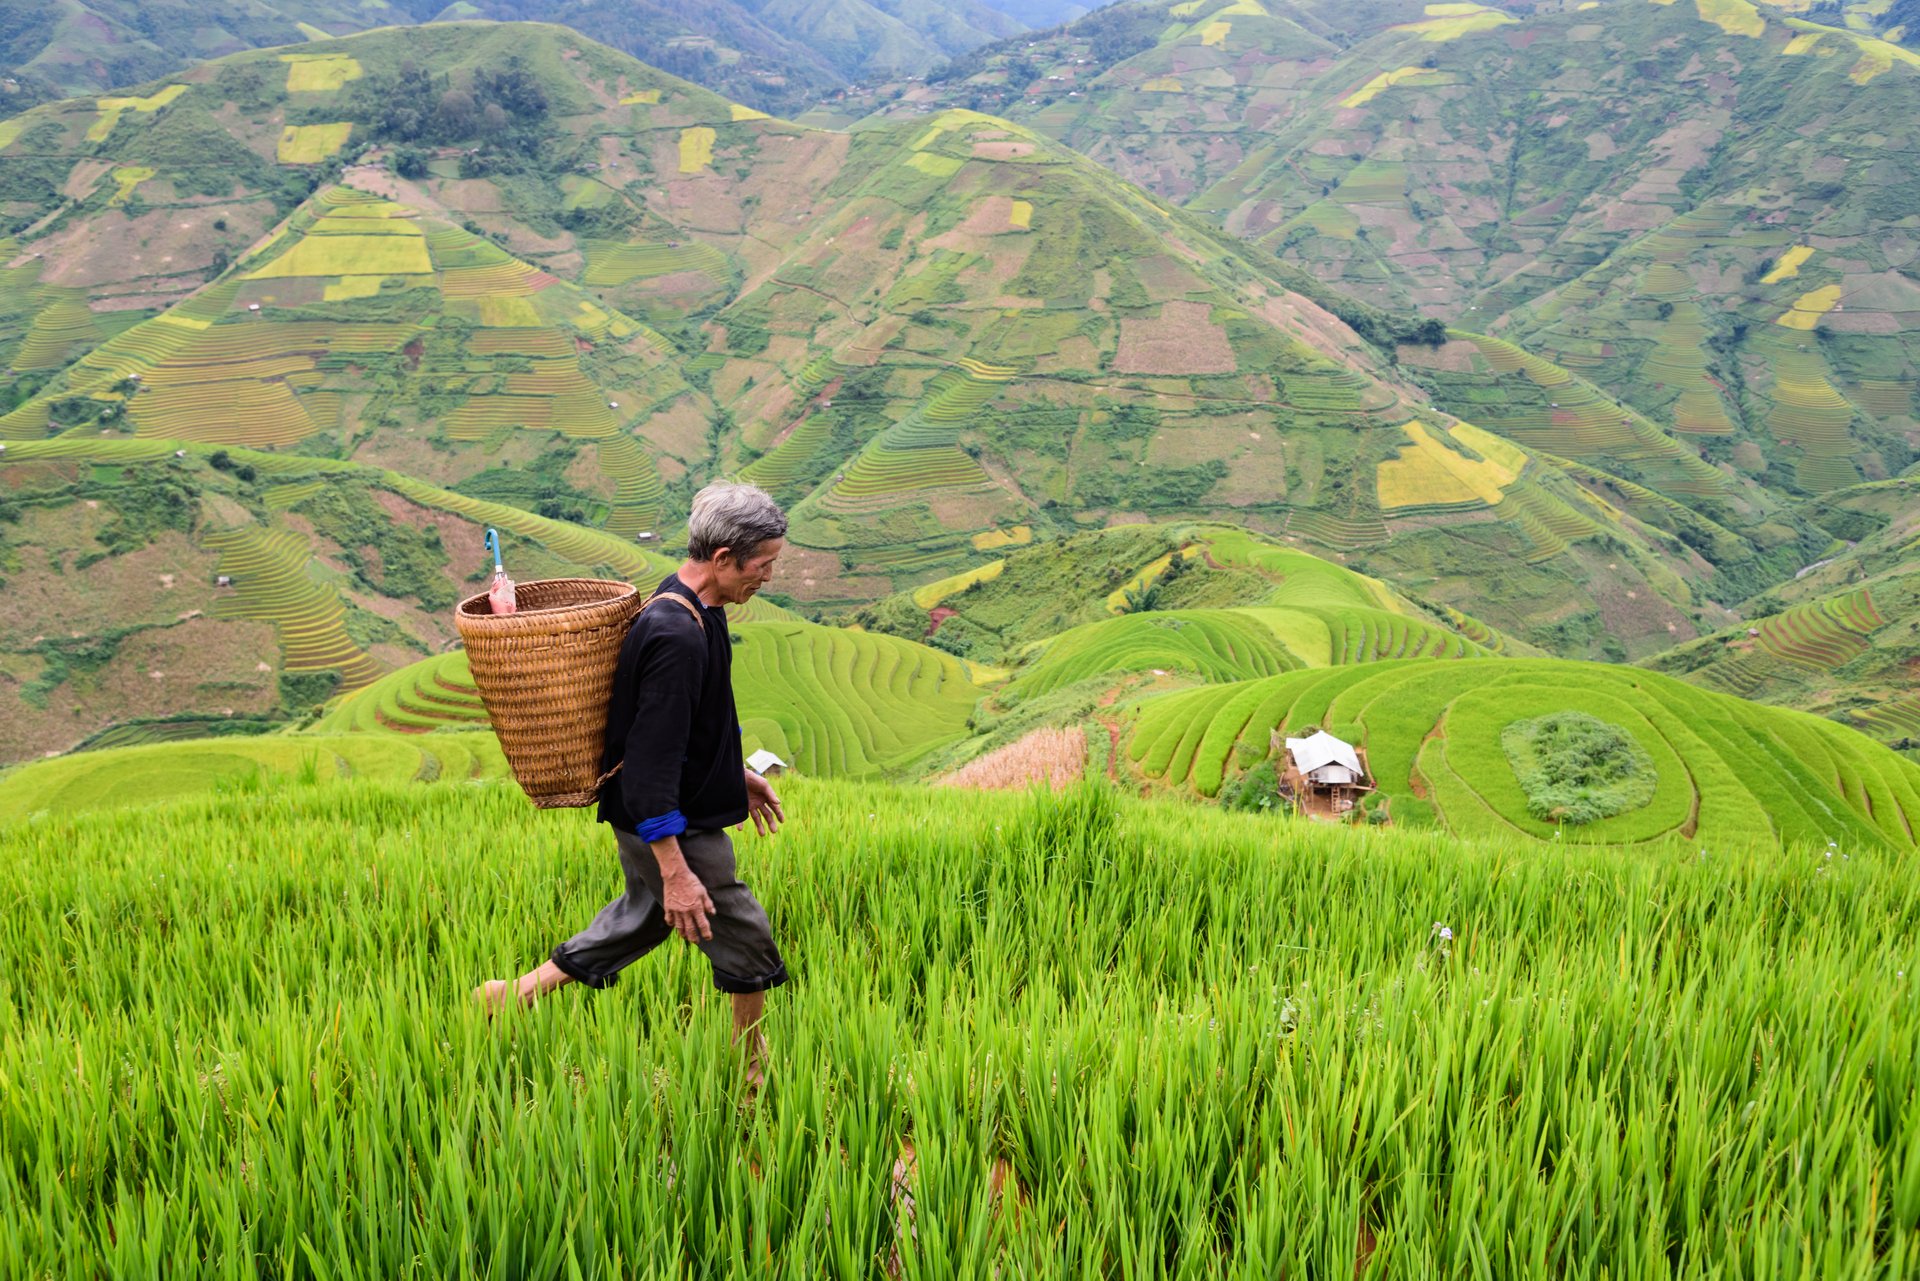 Farmer walks through a rice paddy high up a hill with a basket on their back.